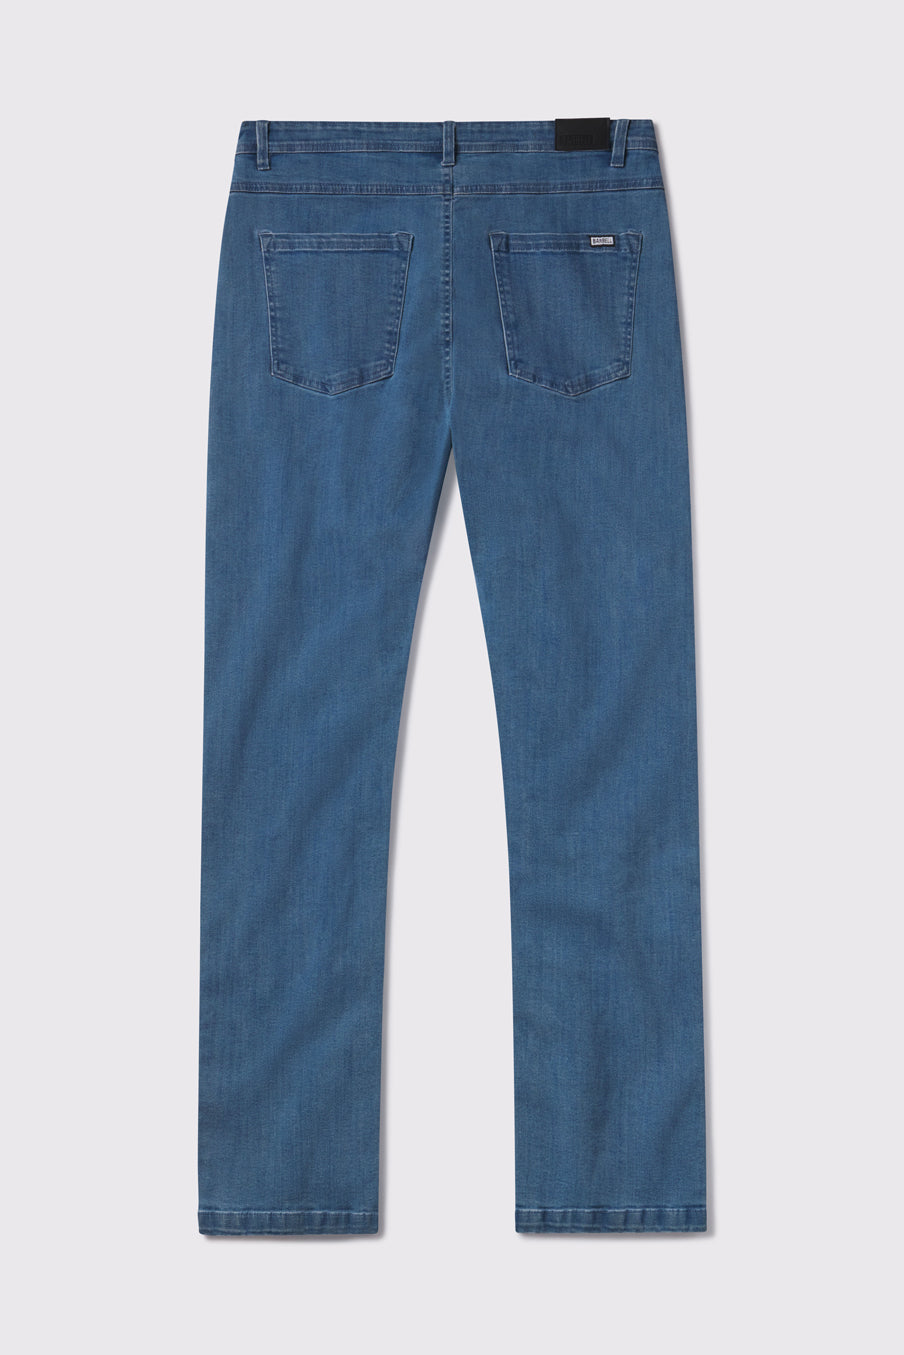 Mens Boot Cut Athletic Fit Jeans 2.0 -Light Wash - photo from back flat lay #color_light-wash